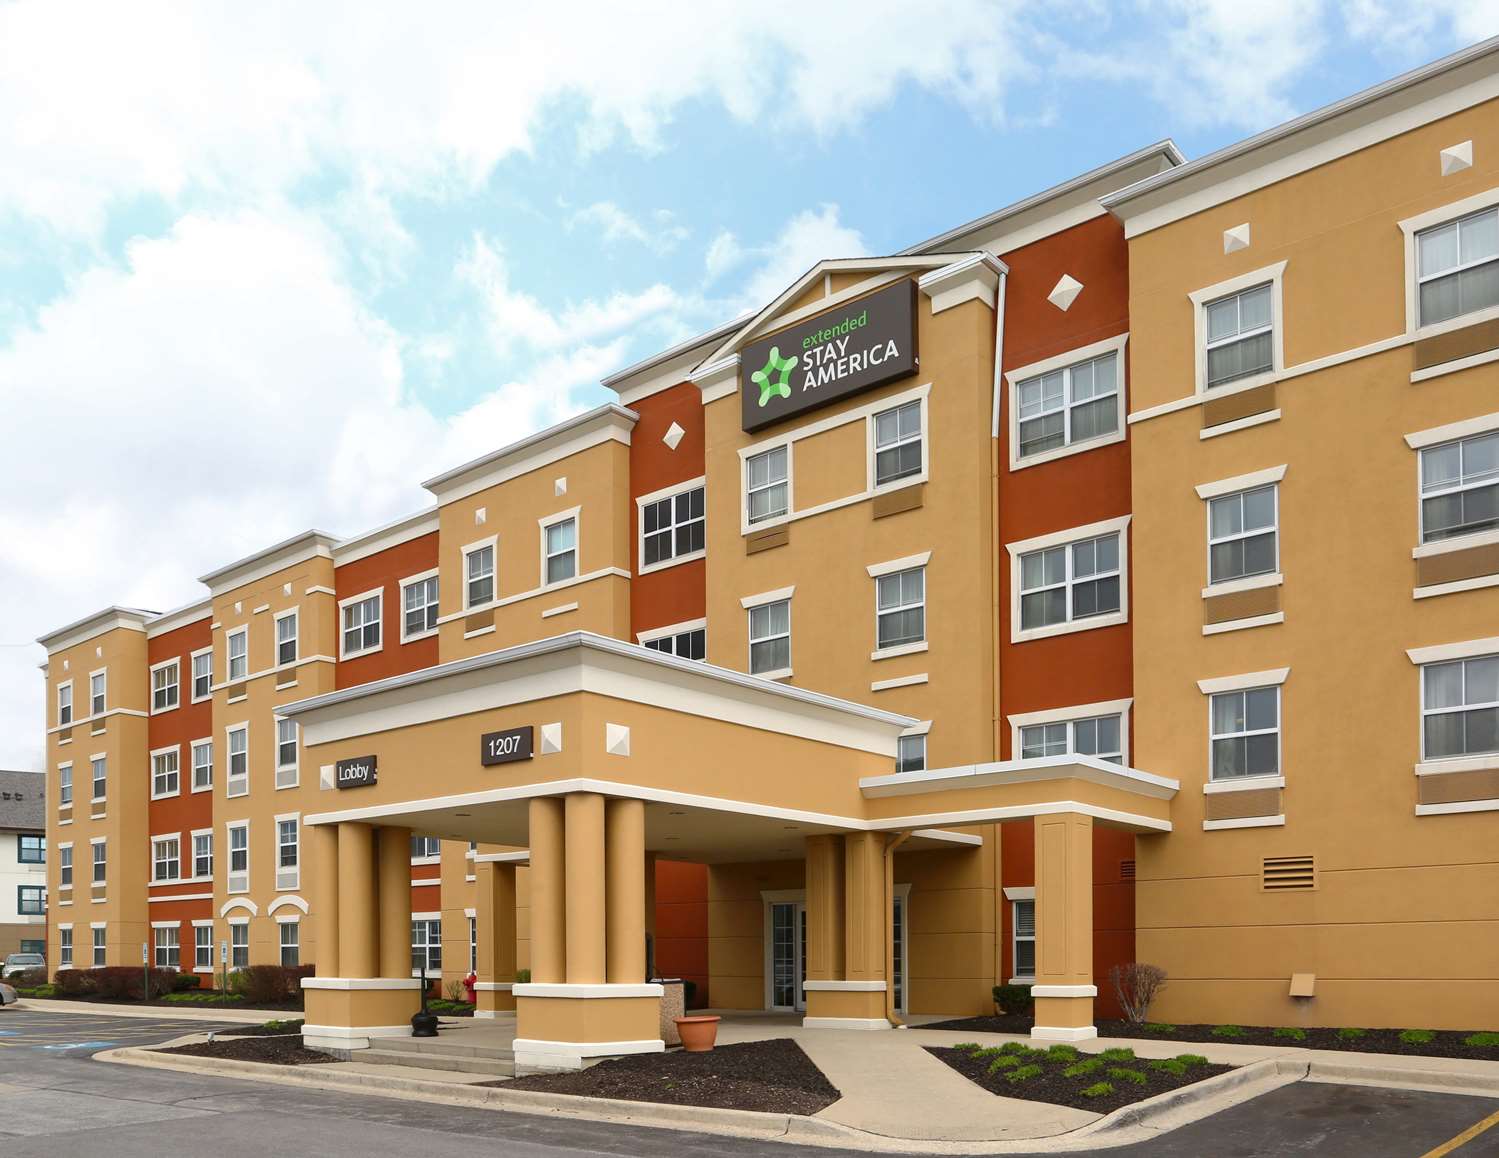 Pet Friendly Extended Stay America - Downers Grove in Downers Grove, Illinois